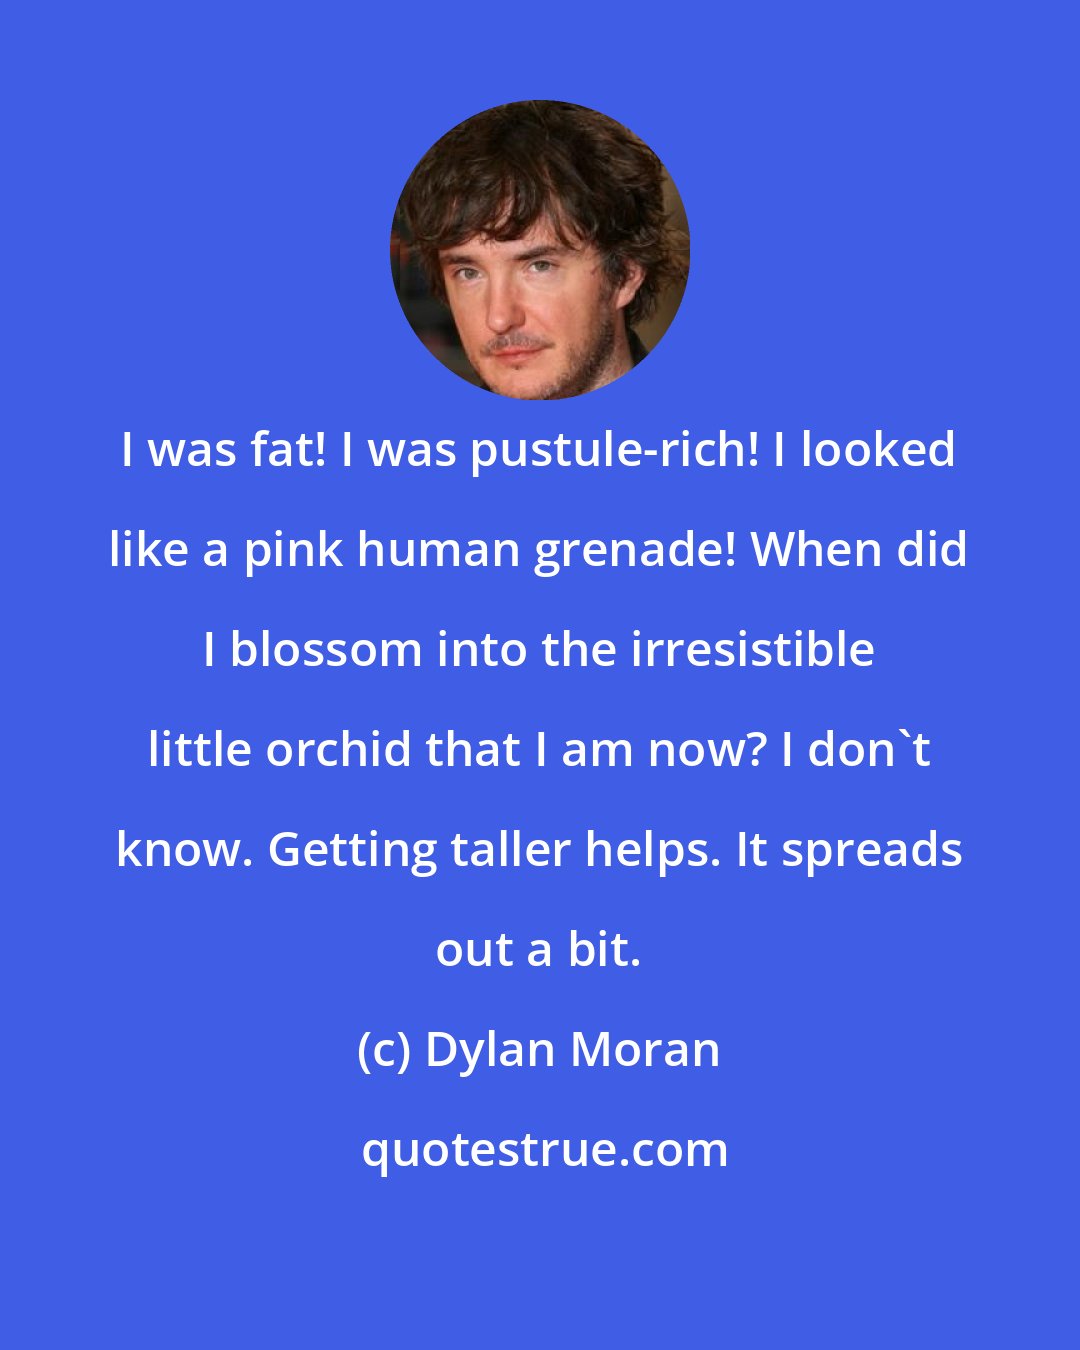 Dylan Moran: I was fat! I was pustule-rich! I looked like a pink human grenade! When did I blossom into the irresistible little orchid that I am now? I don't know. Getting taller helps. It spreads out a bit.